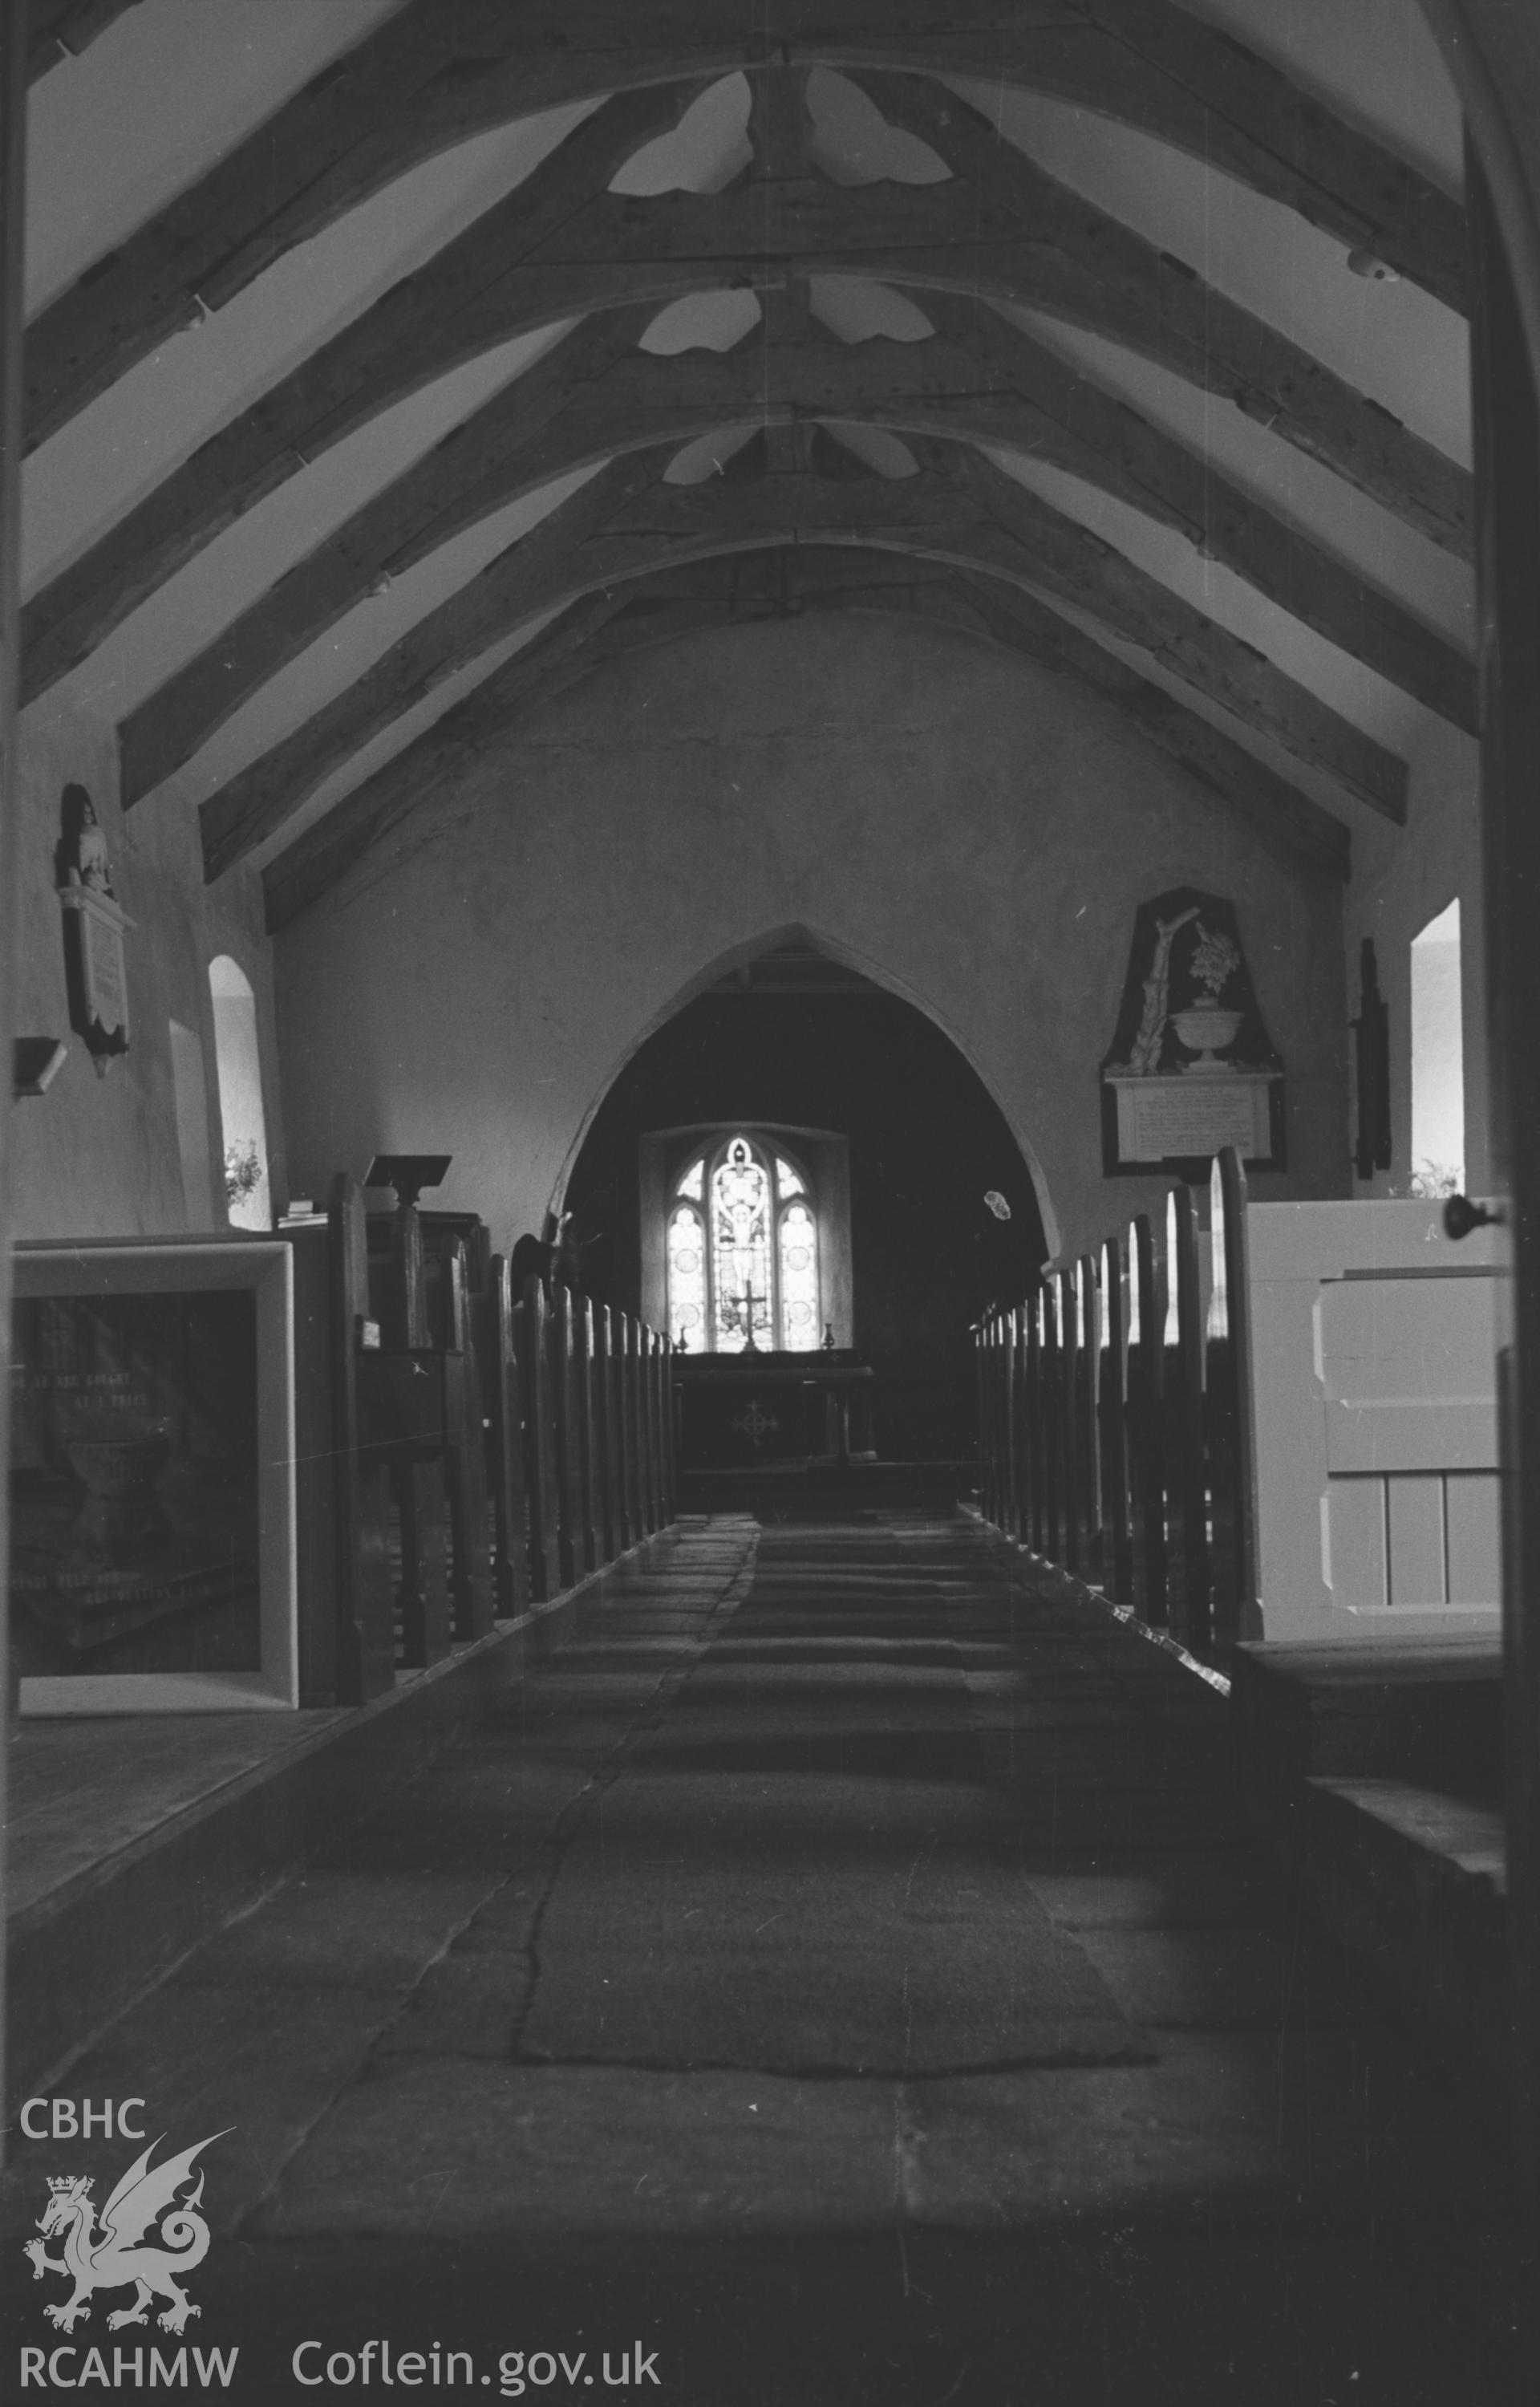 Digital copy of a black and white negative showing interior view of St. Michael's church, Penbryn. Photographed in August 1963 by Arthur O. Chater from Grid Reference SN 2935 5211, looking east.